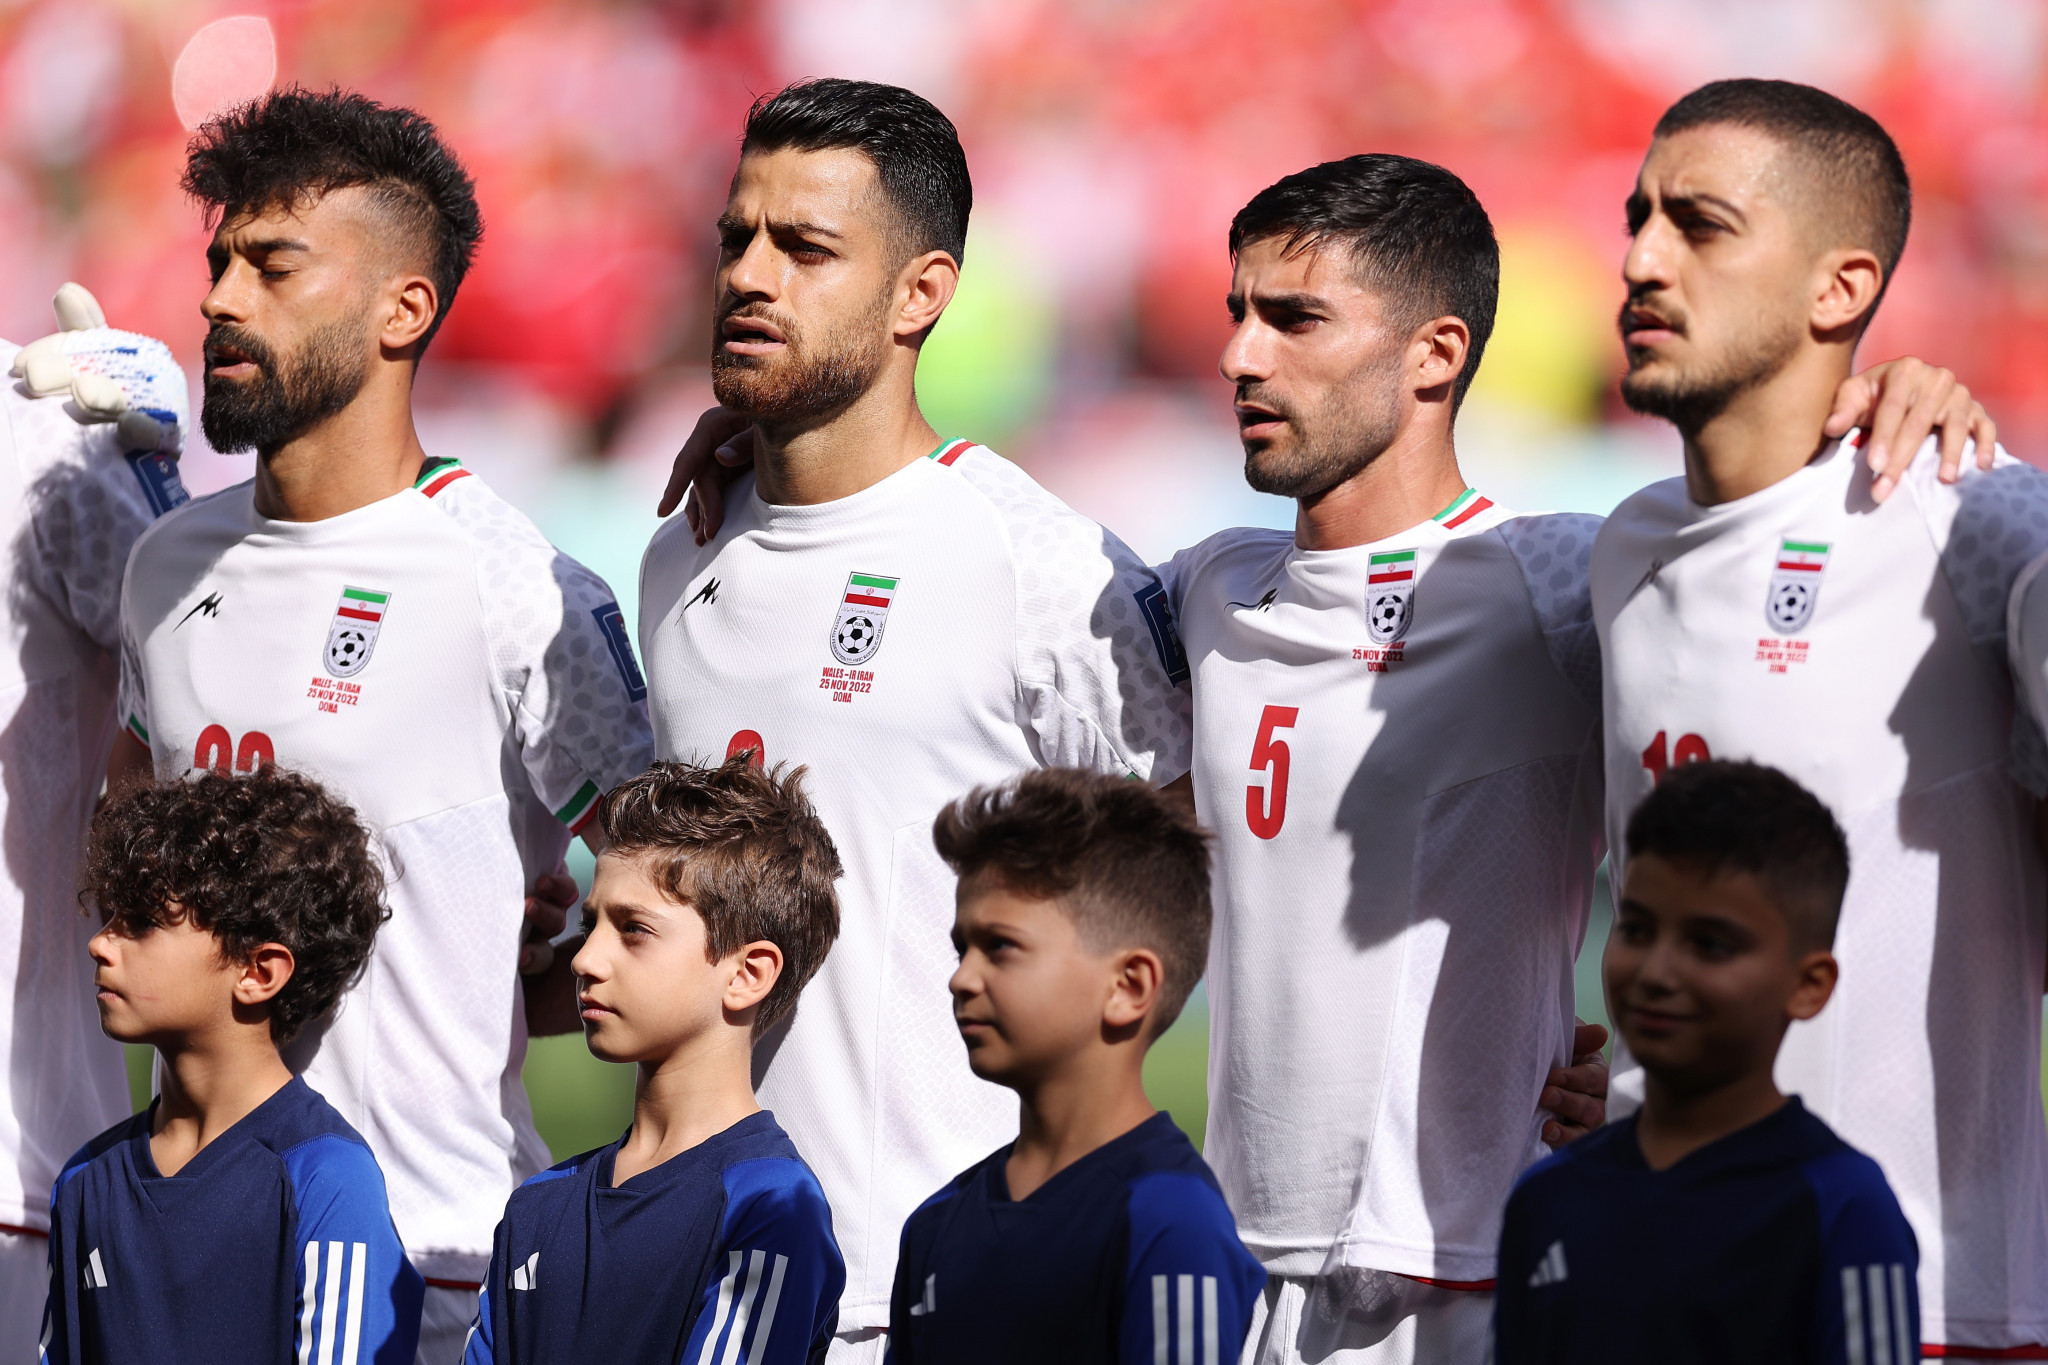 Players chose to sing the Iranian national anthem before facing Wales after standing in silence prior to taking on England ©Getty Images